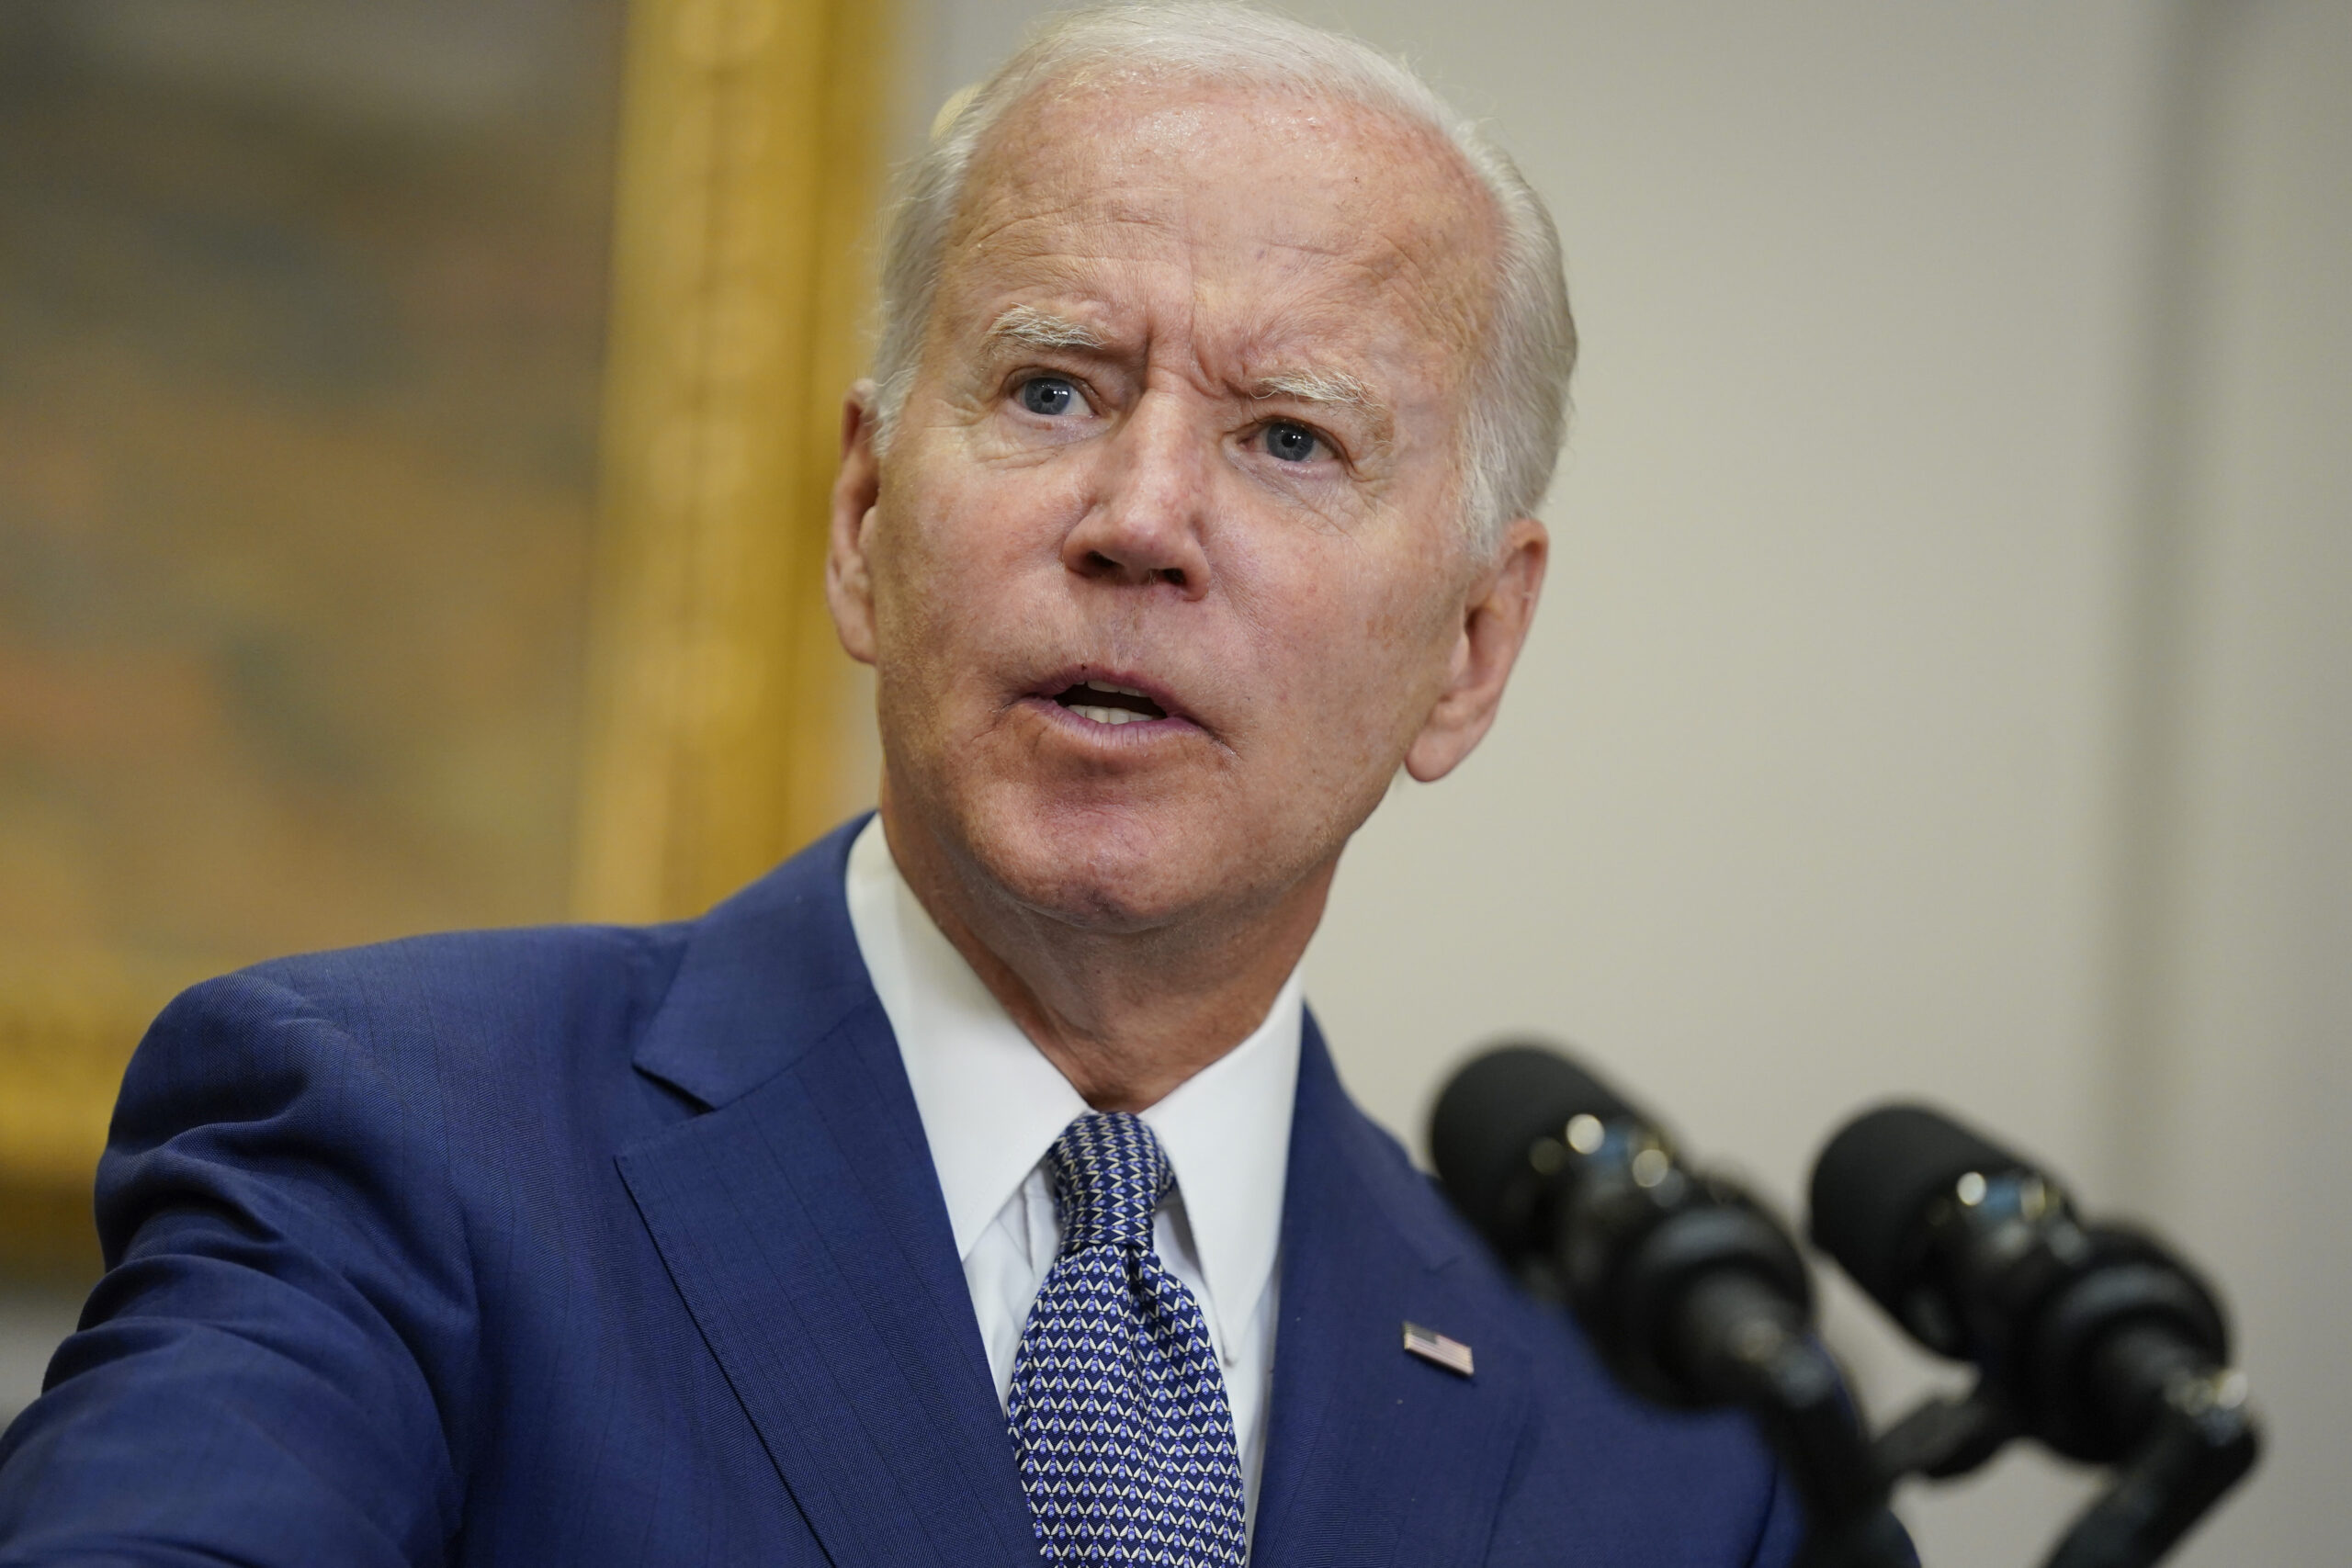 ‘End of quote’: Biden has yet another teleprompter fail - Washington Examiner